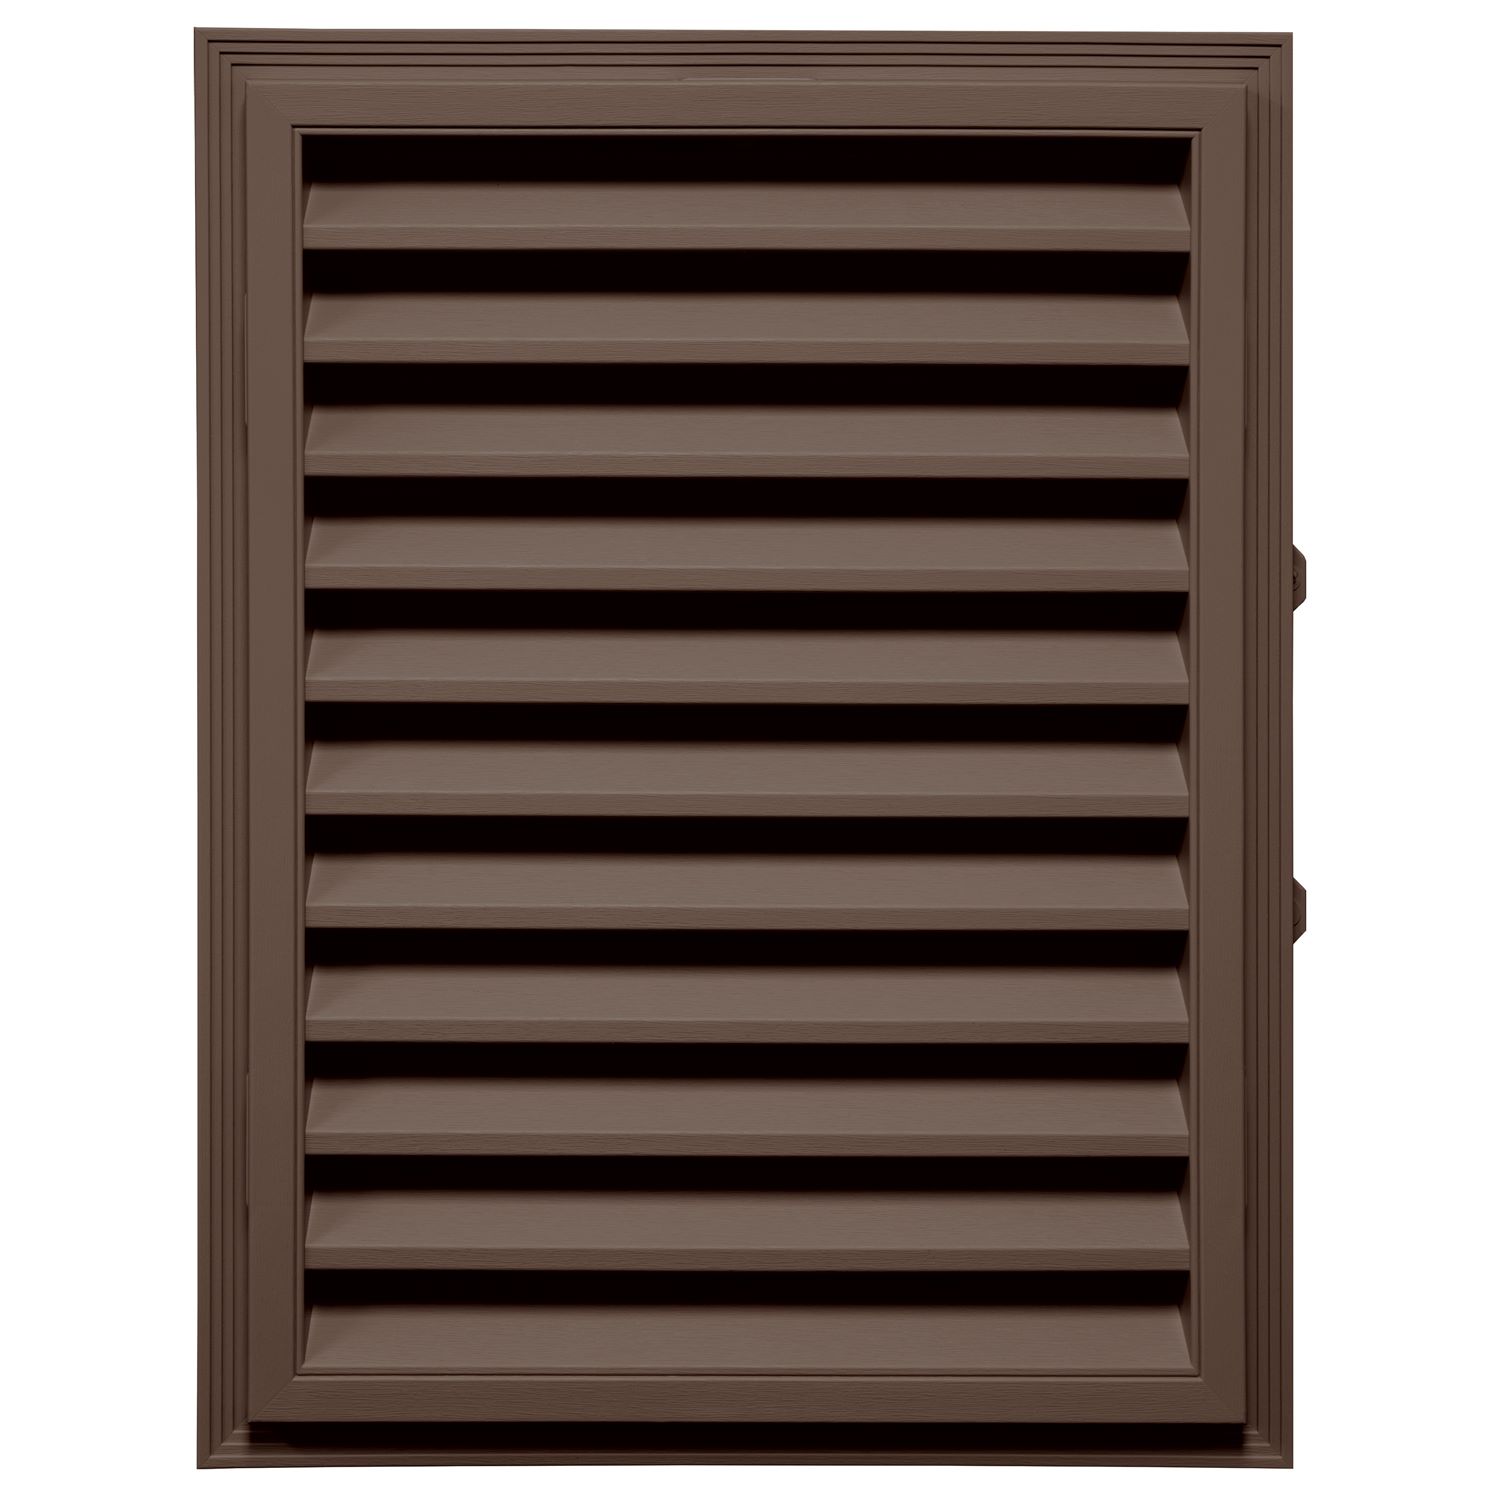 18in. x 24in. - 032 Brown